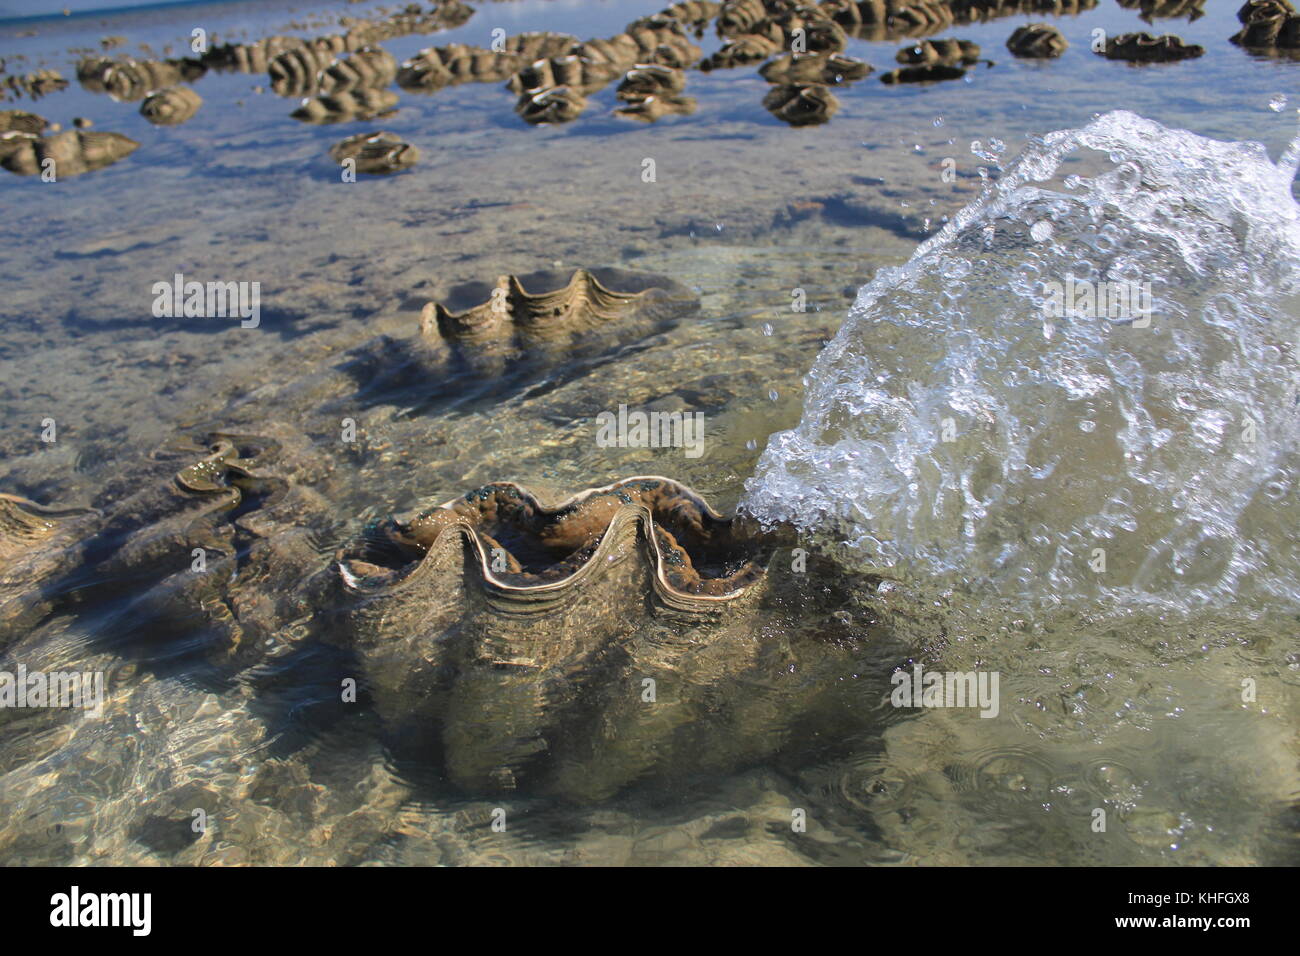 Giant clams spout saltwater as they close their shells at low tide on Orpheus Island Research Station, Queensland, Australia. Stock Photo